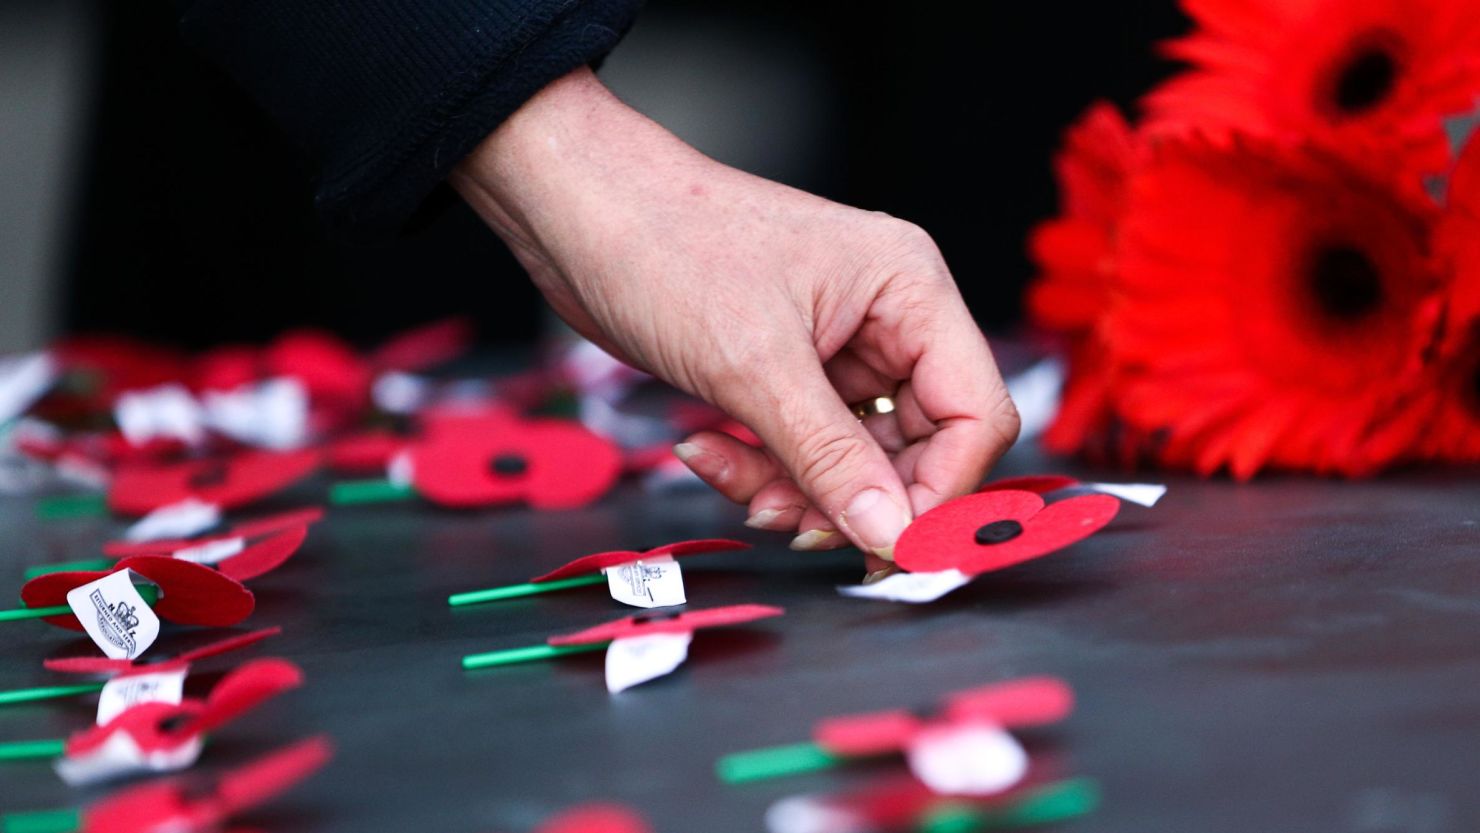 Poppies are laid on the Tomb of the Unknown Warrior during the Anzac Day Dawn Service at Pukeahu National War Memorial Park on April 25, 2018 in Wellington, New Zealand.